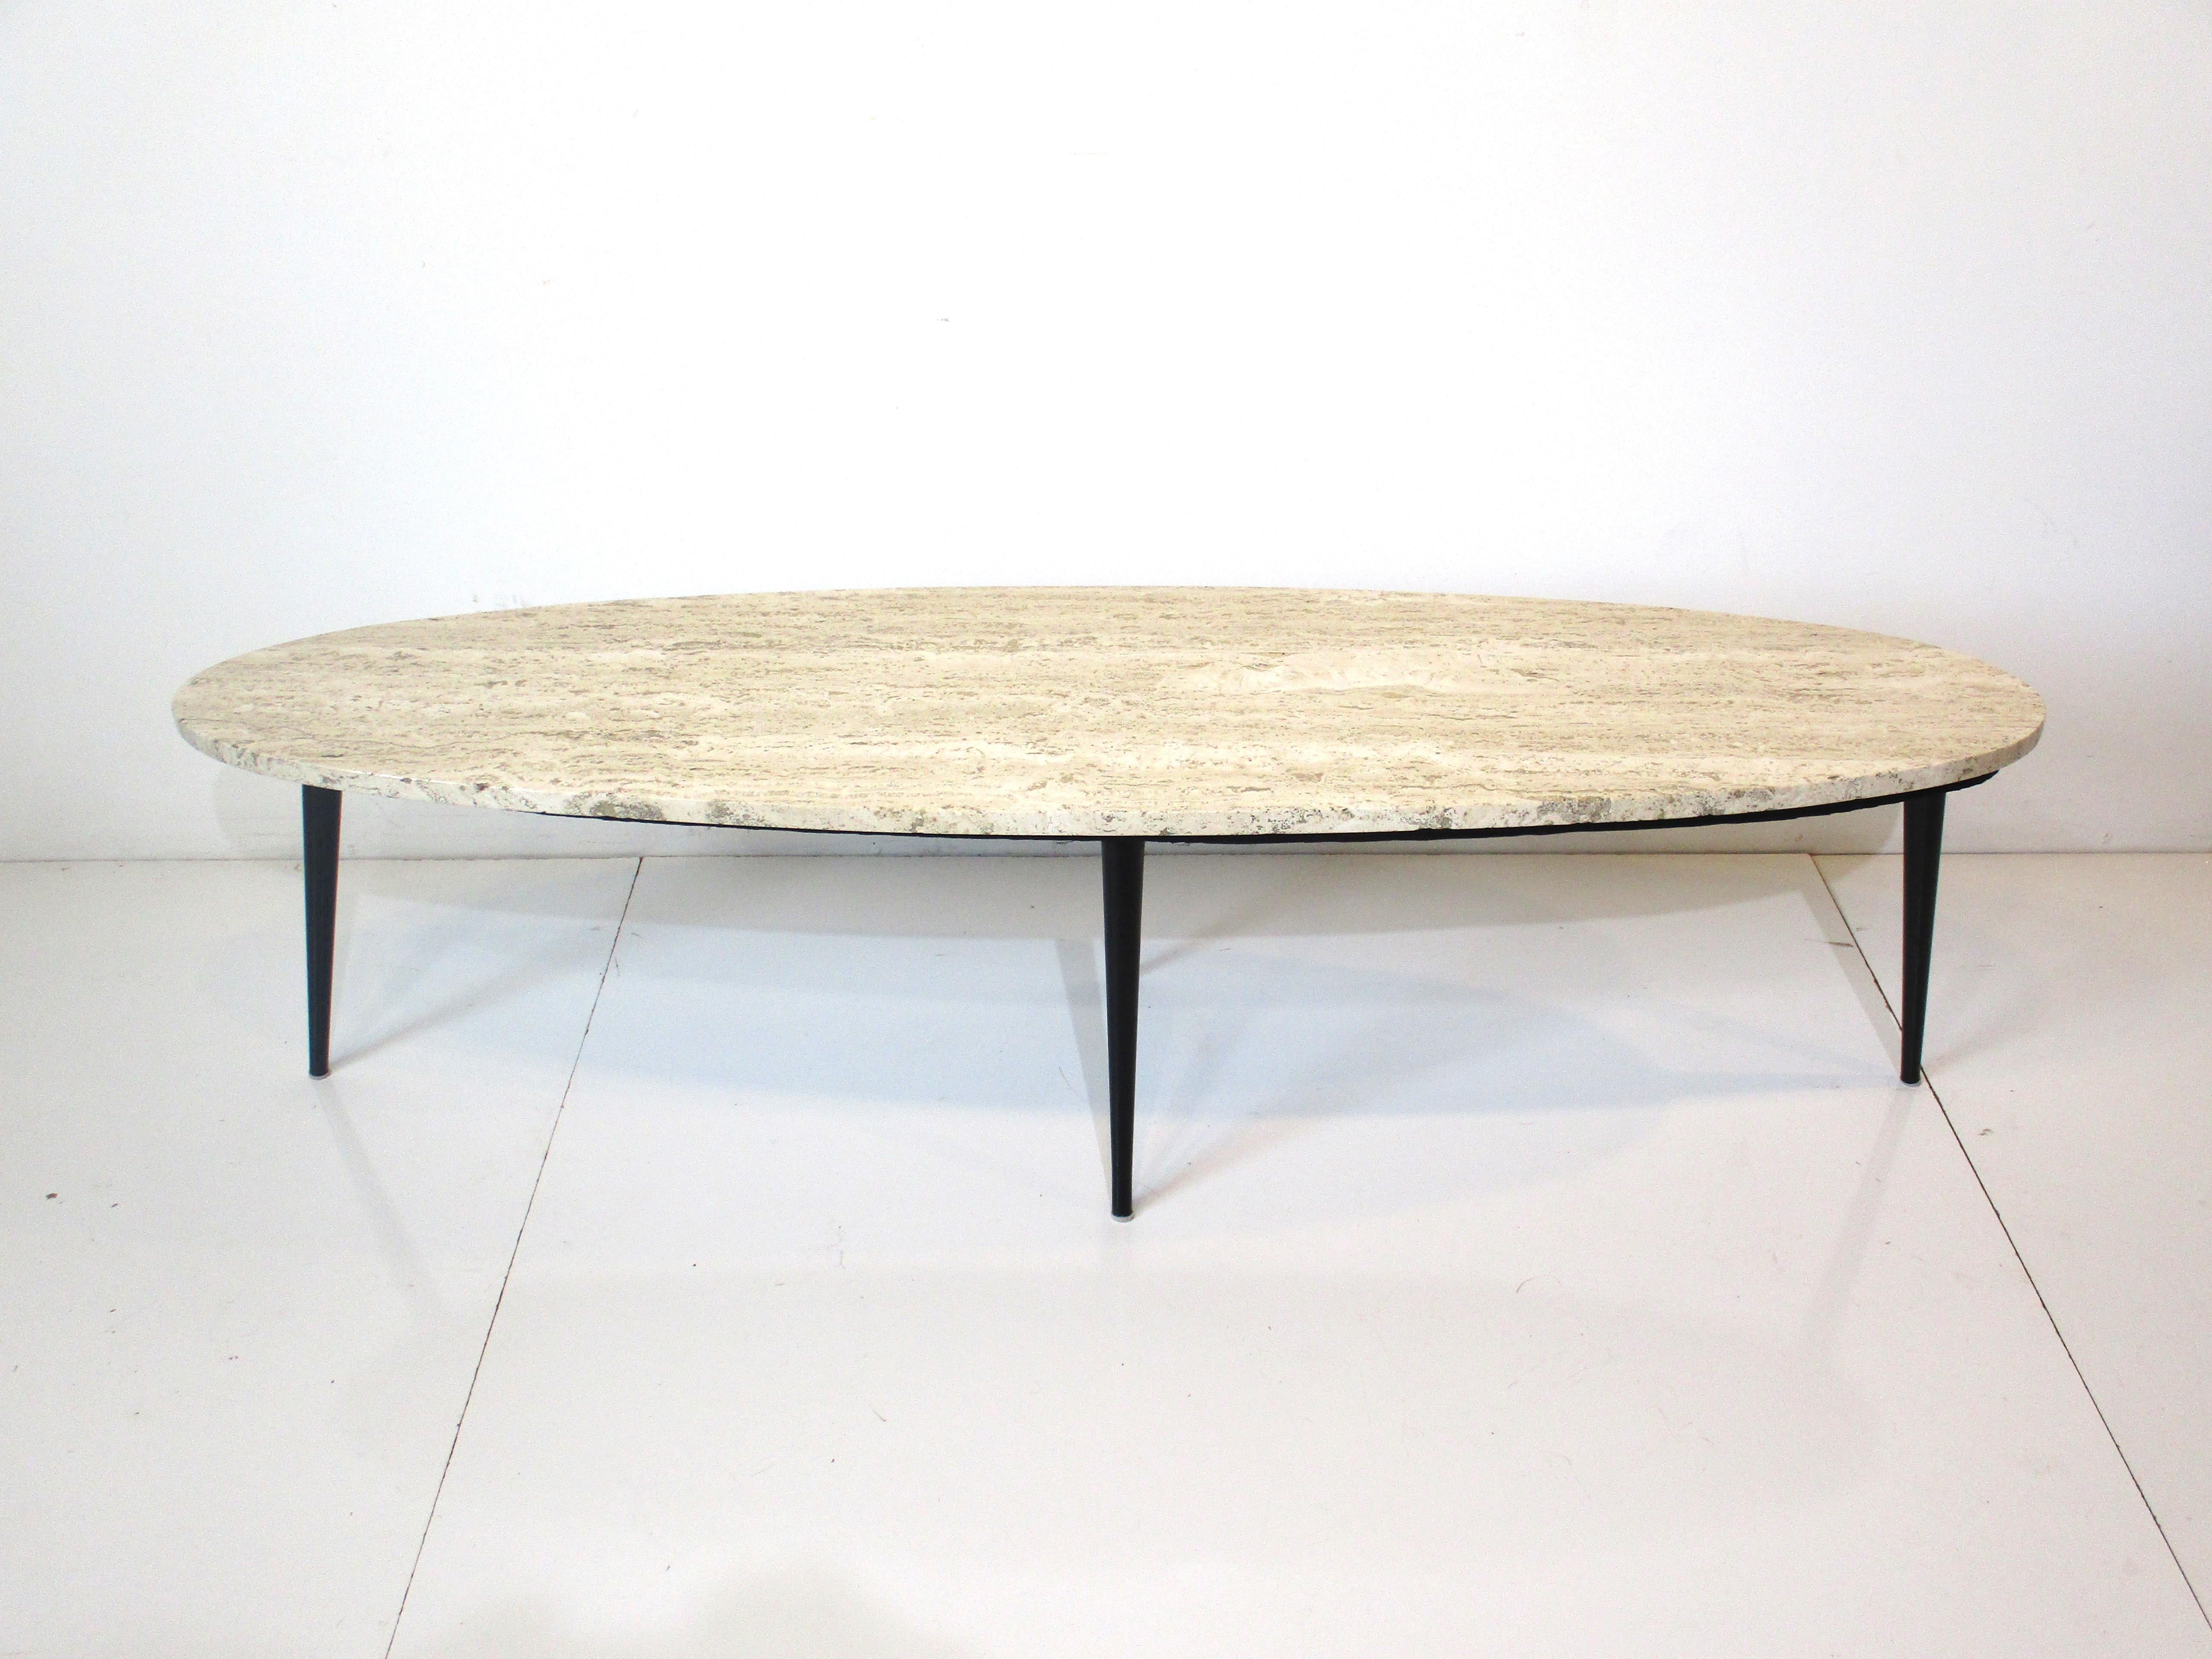 A wonderfully veined oval marble coffee table with satin black steel conical legs giving the piece a lighter feel and look . This two piece table is perfect for a longer sofa and would work with many styles and decors.